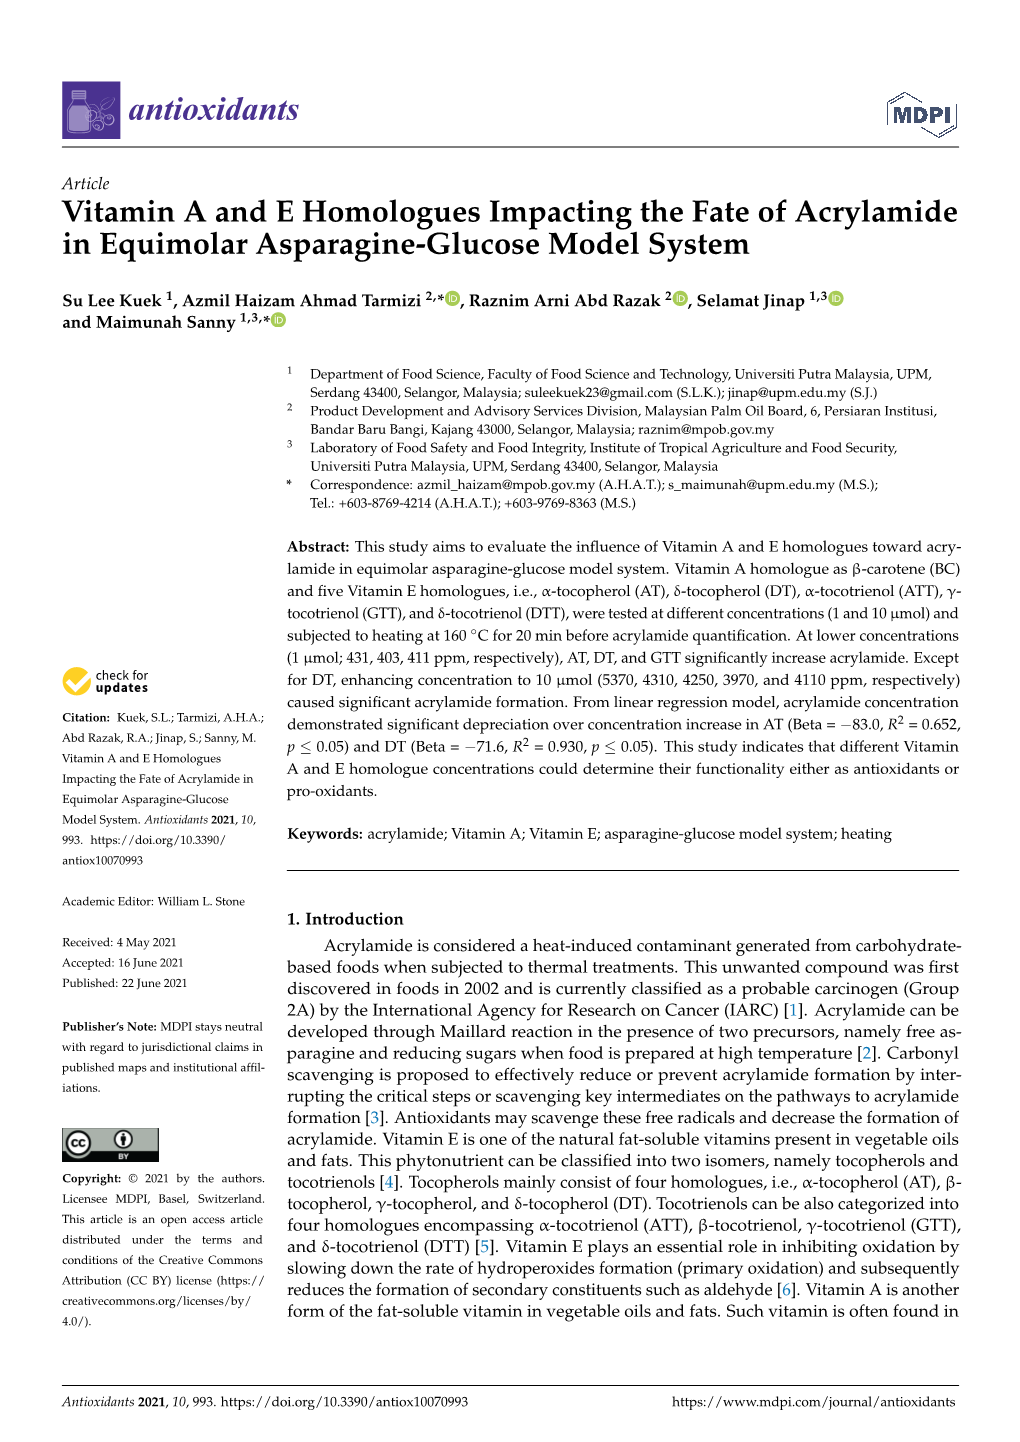 Vitamin a and E Homologues Impacting the Fate of Acrylamide in Equimolar Asparagine-Glucose Model System